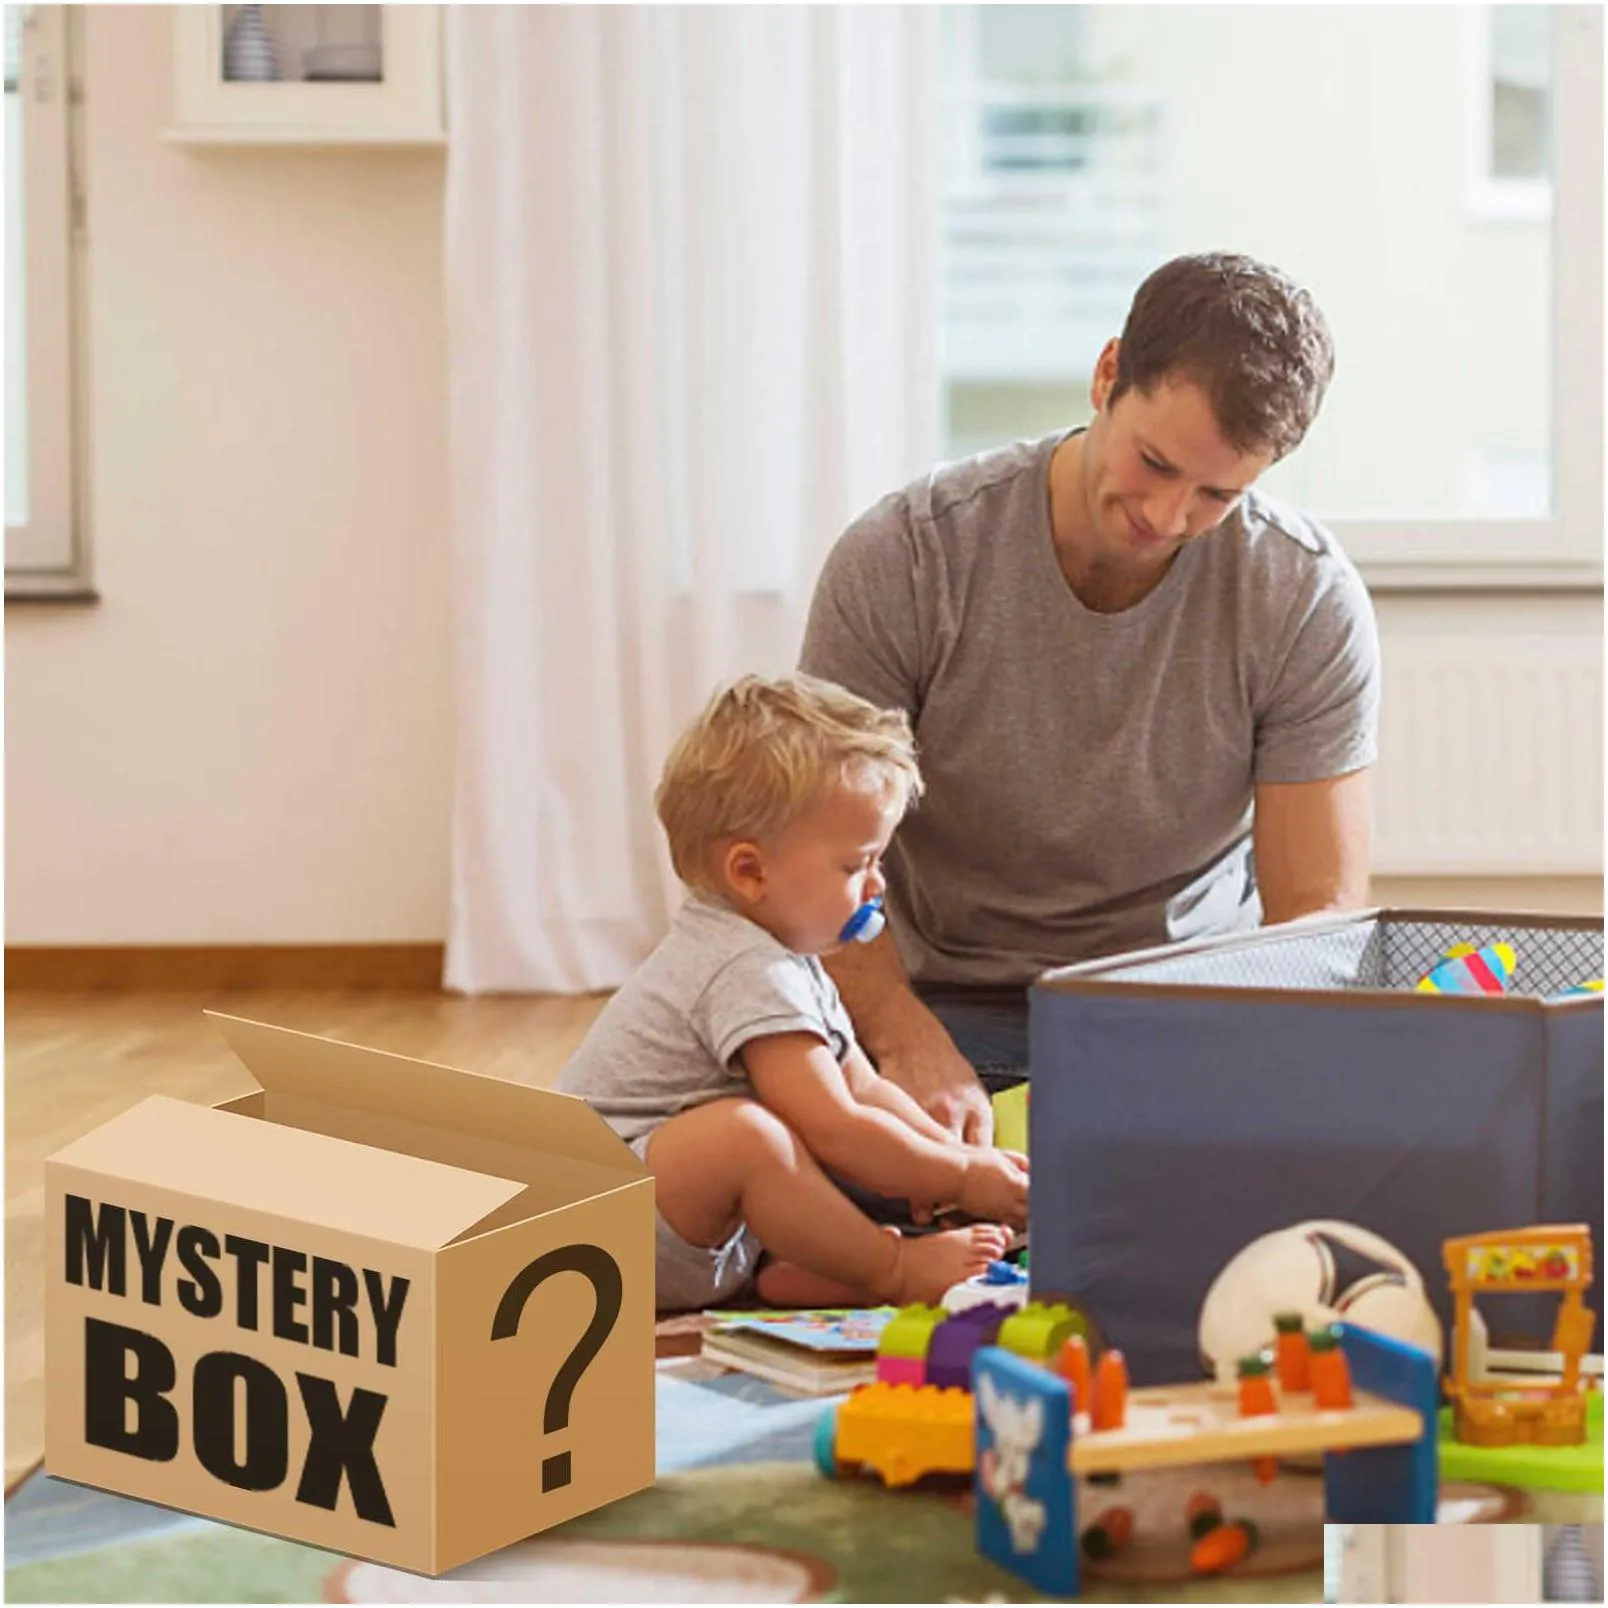 lucky mystery box electronics speakers birthday surprise gifts lucky gifts for adults such as bluetooth speakers